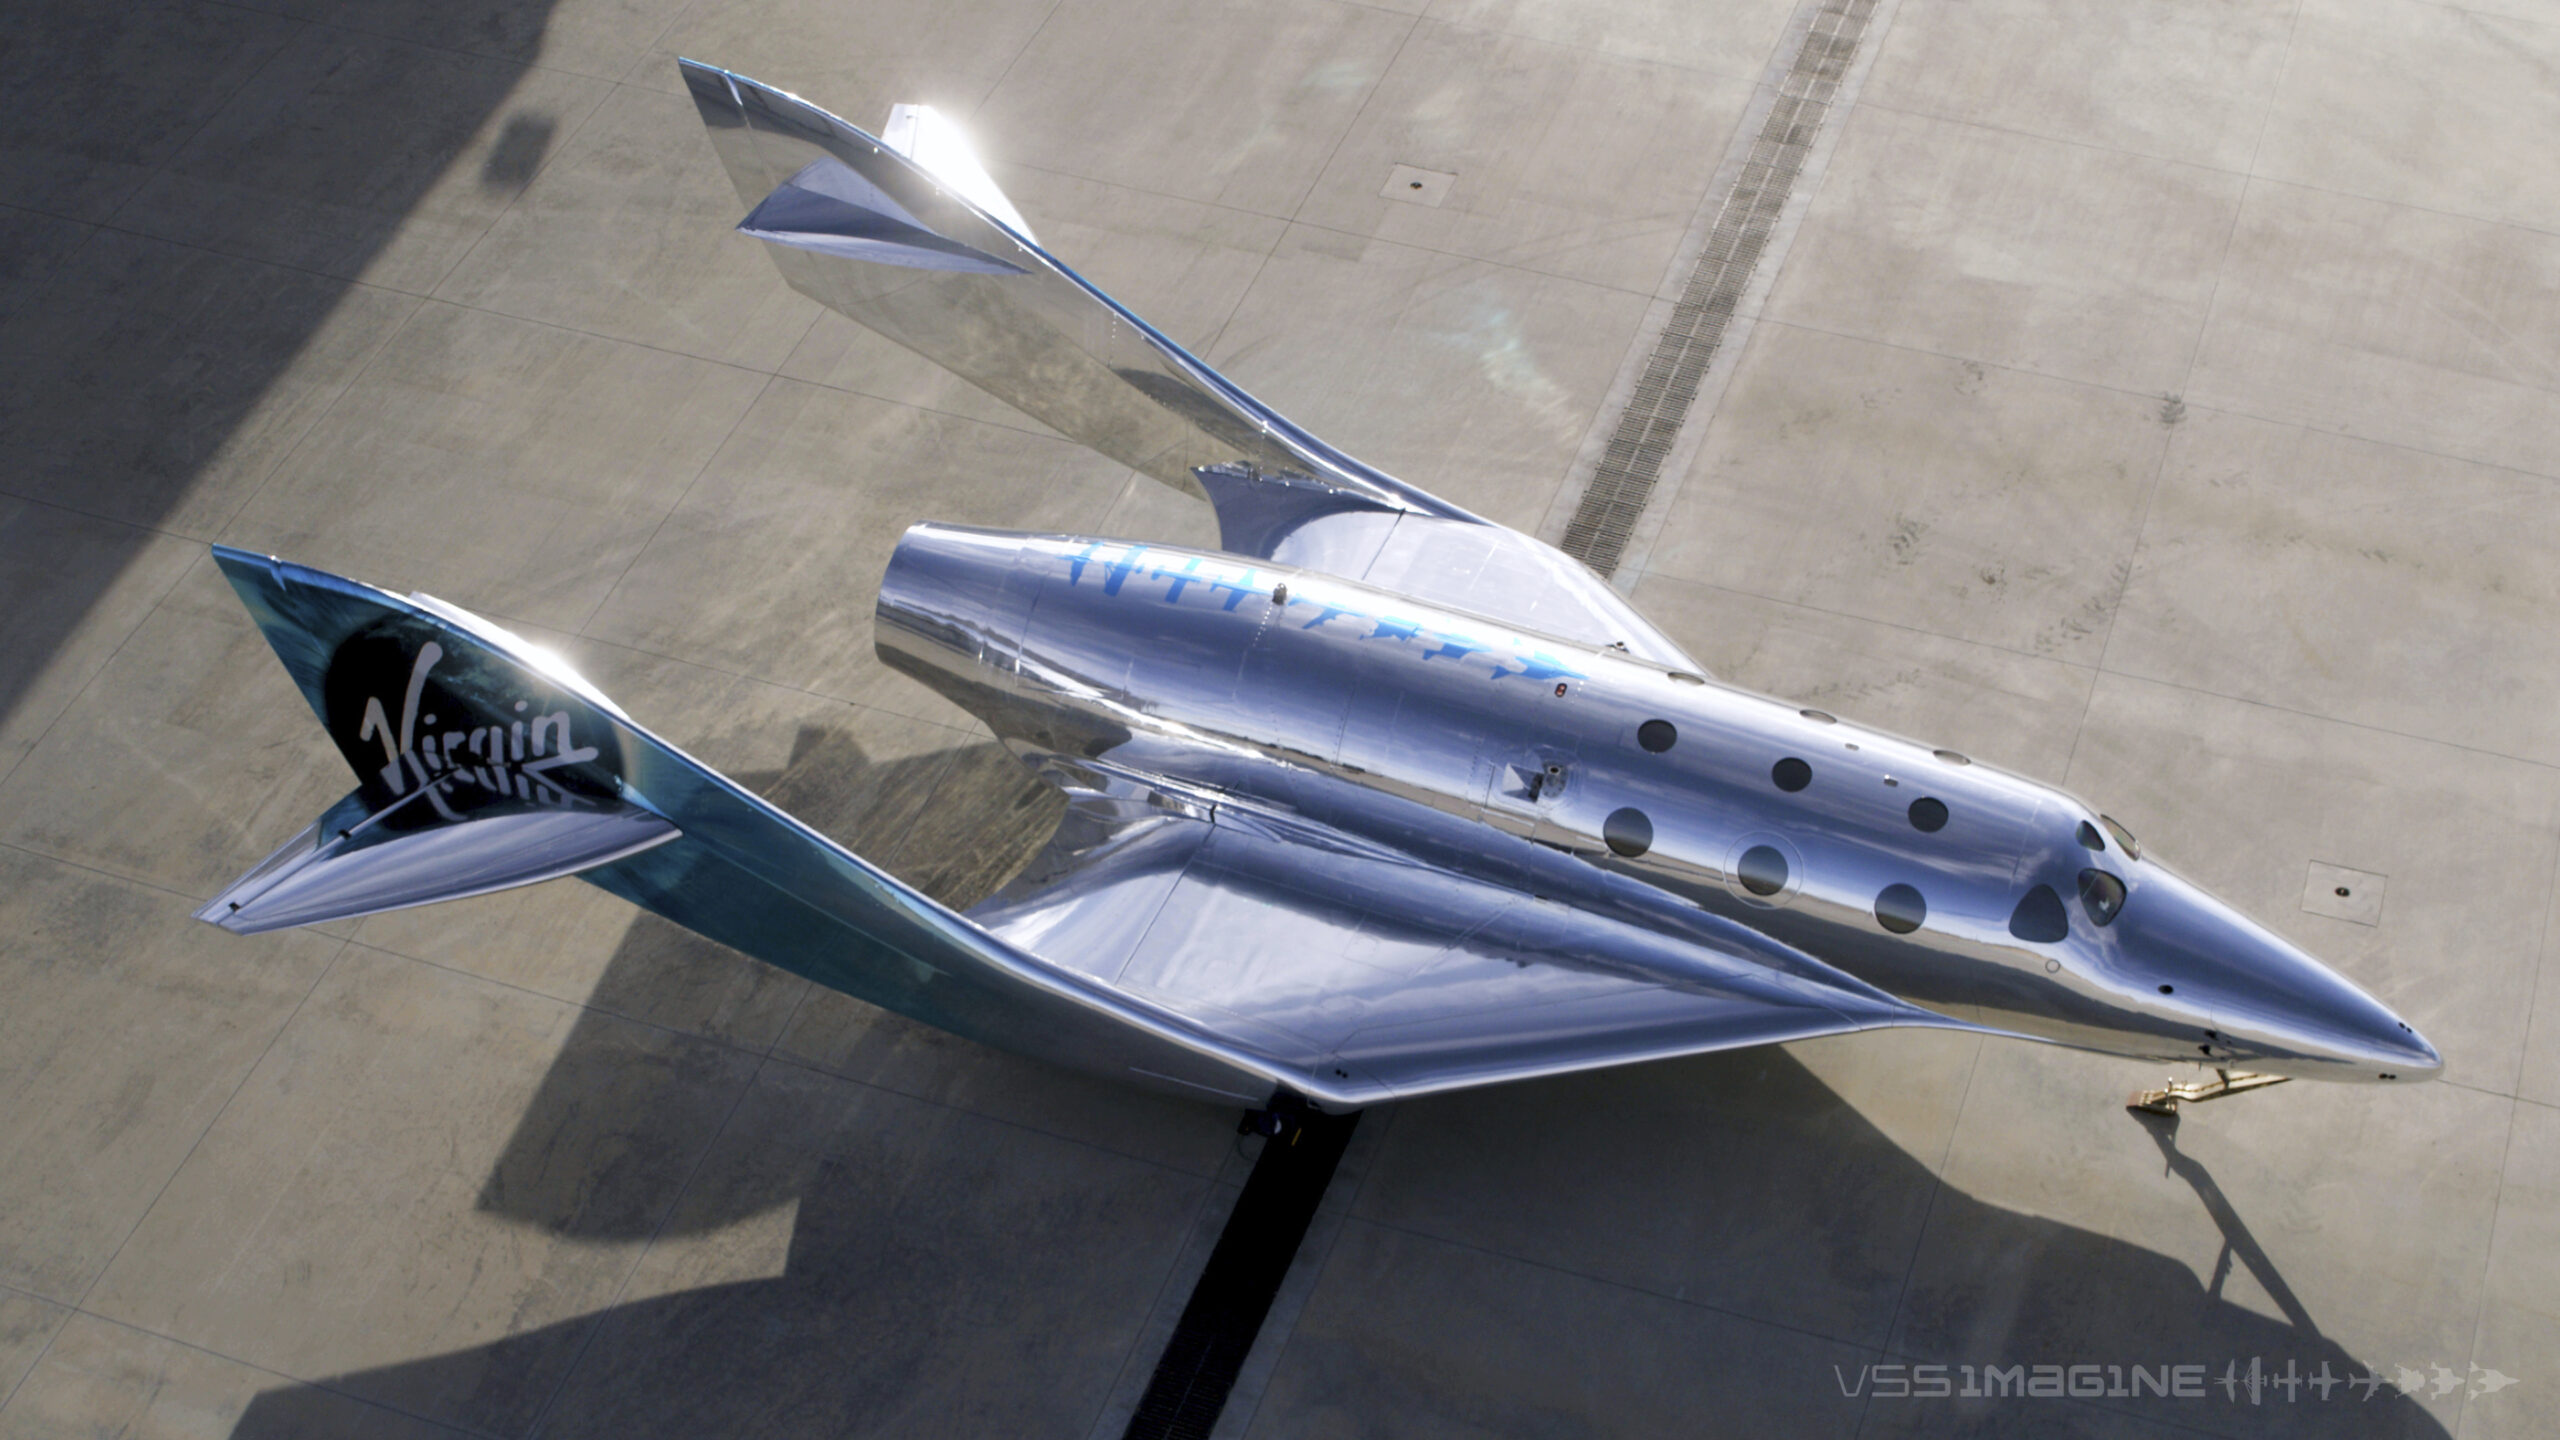 In this undated photo provided by Virgin Galactic is the VSS Imagine, the first SpaceShip III in the Virgin Galactic Fleet in Mojave, Calif. Virgin Galactic rolled out its newest spaceship Tuesday, March 30, 2021, as the company looks to resume test flights in the coming months at its headquarters in the New Mexico desert. Company officials said it will likely be summer before the ship undergoes glide flight testing at Spaceport America in southern New Mexico. (Virgin Galactic via AP).